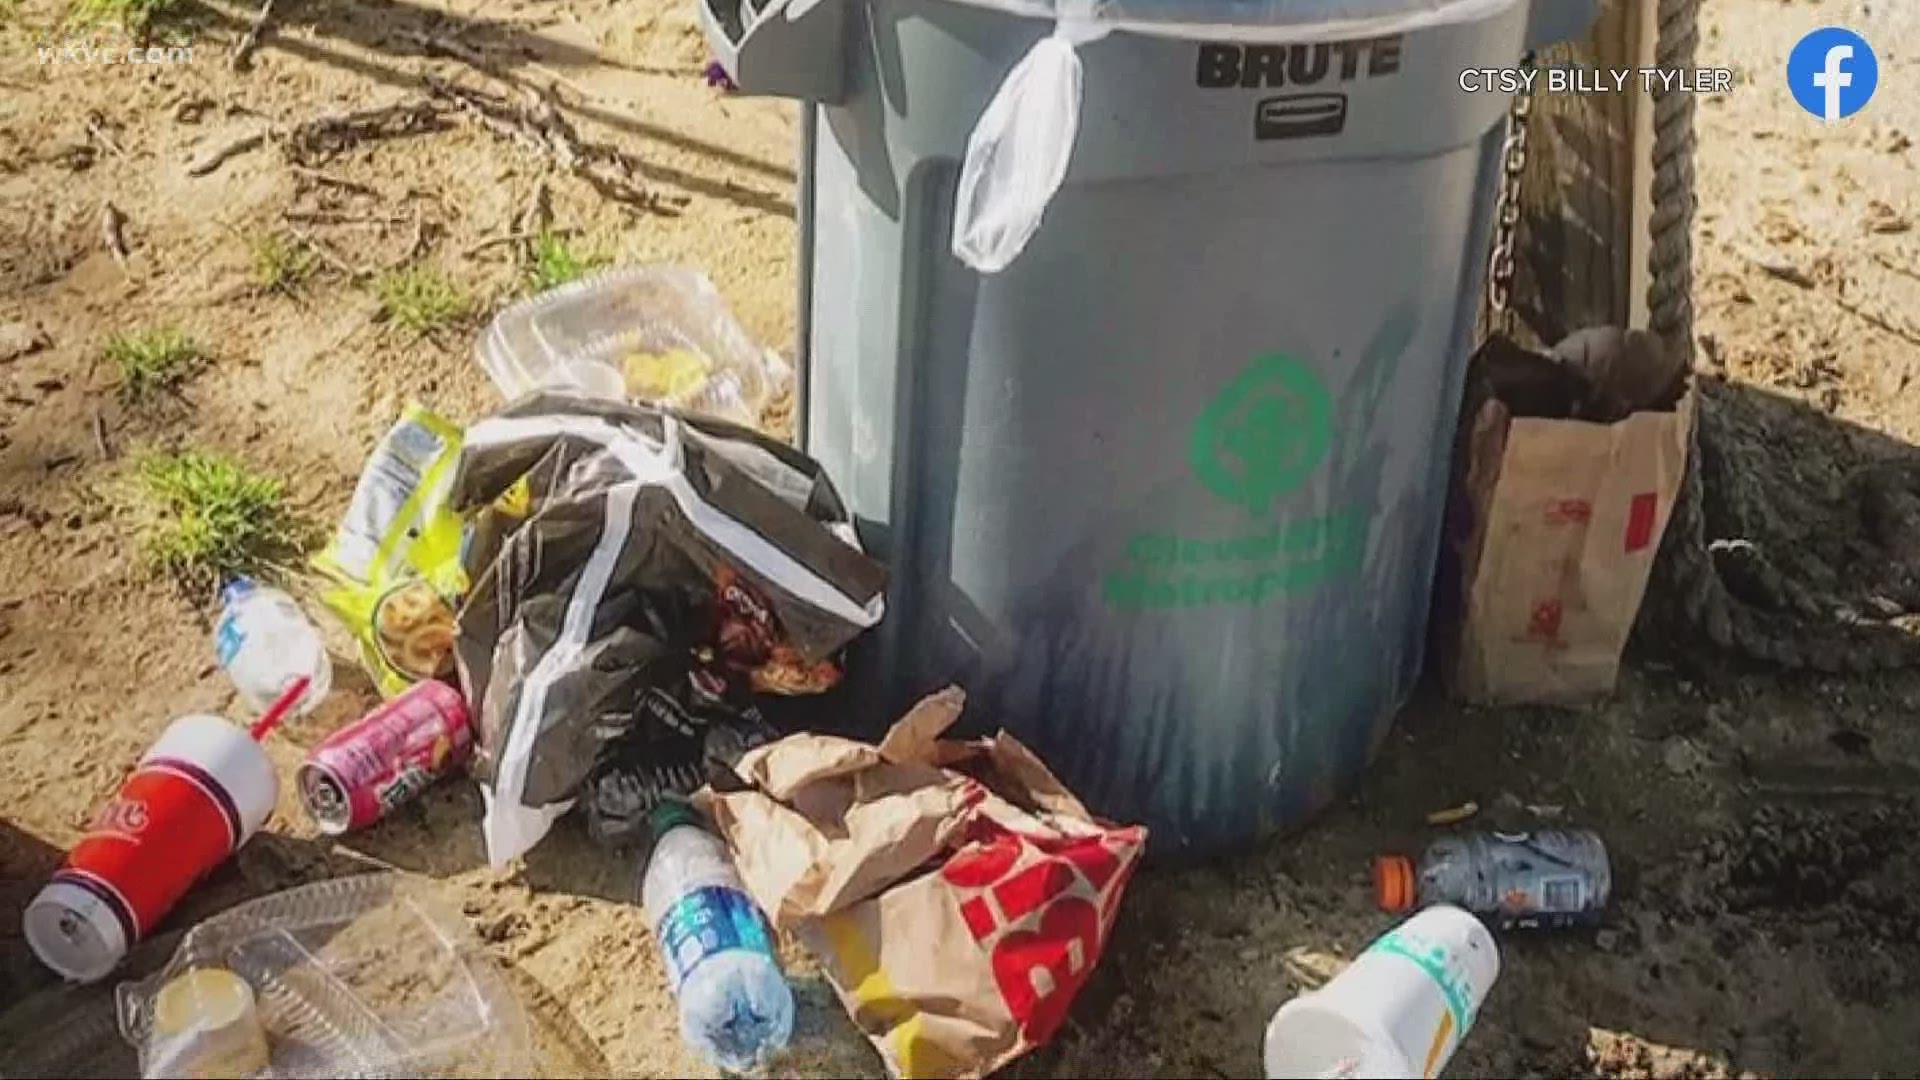 June 12, 2020: As our natural resources, beaches and park systems open up, trash is piling up. Here are few tips to do your part.